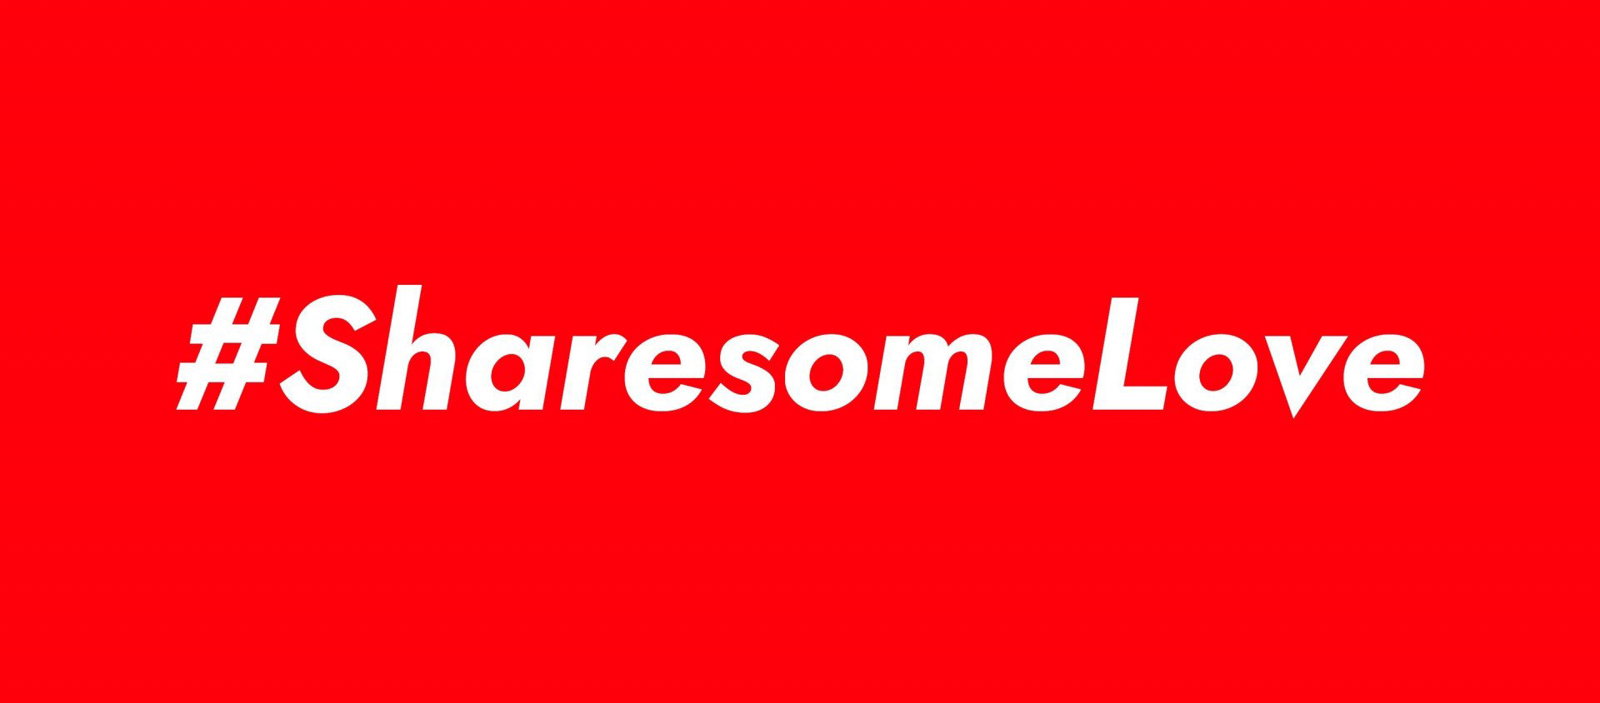 Cover photo of SharesomeLove